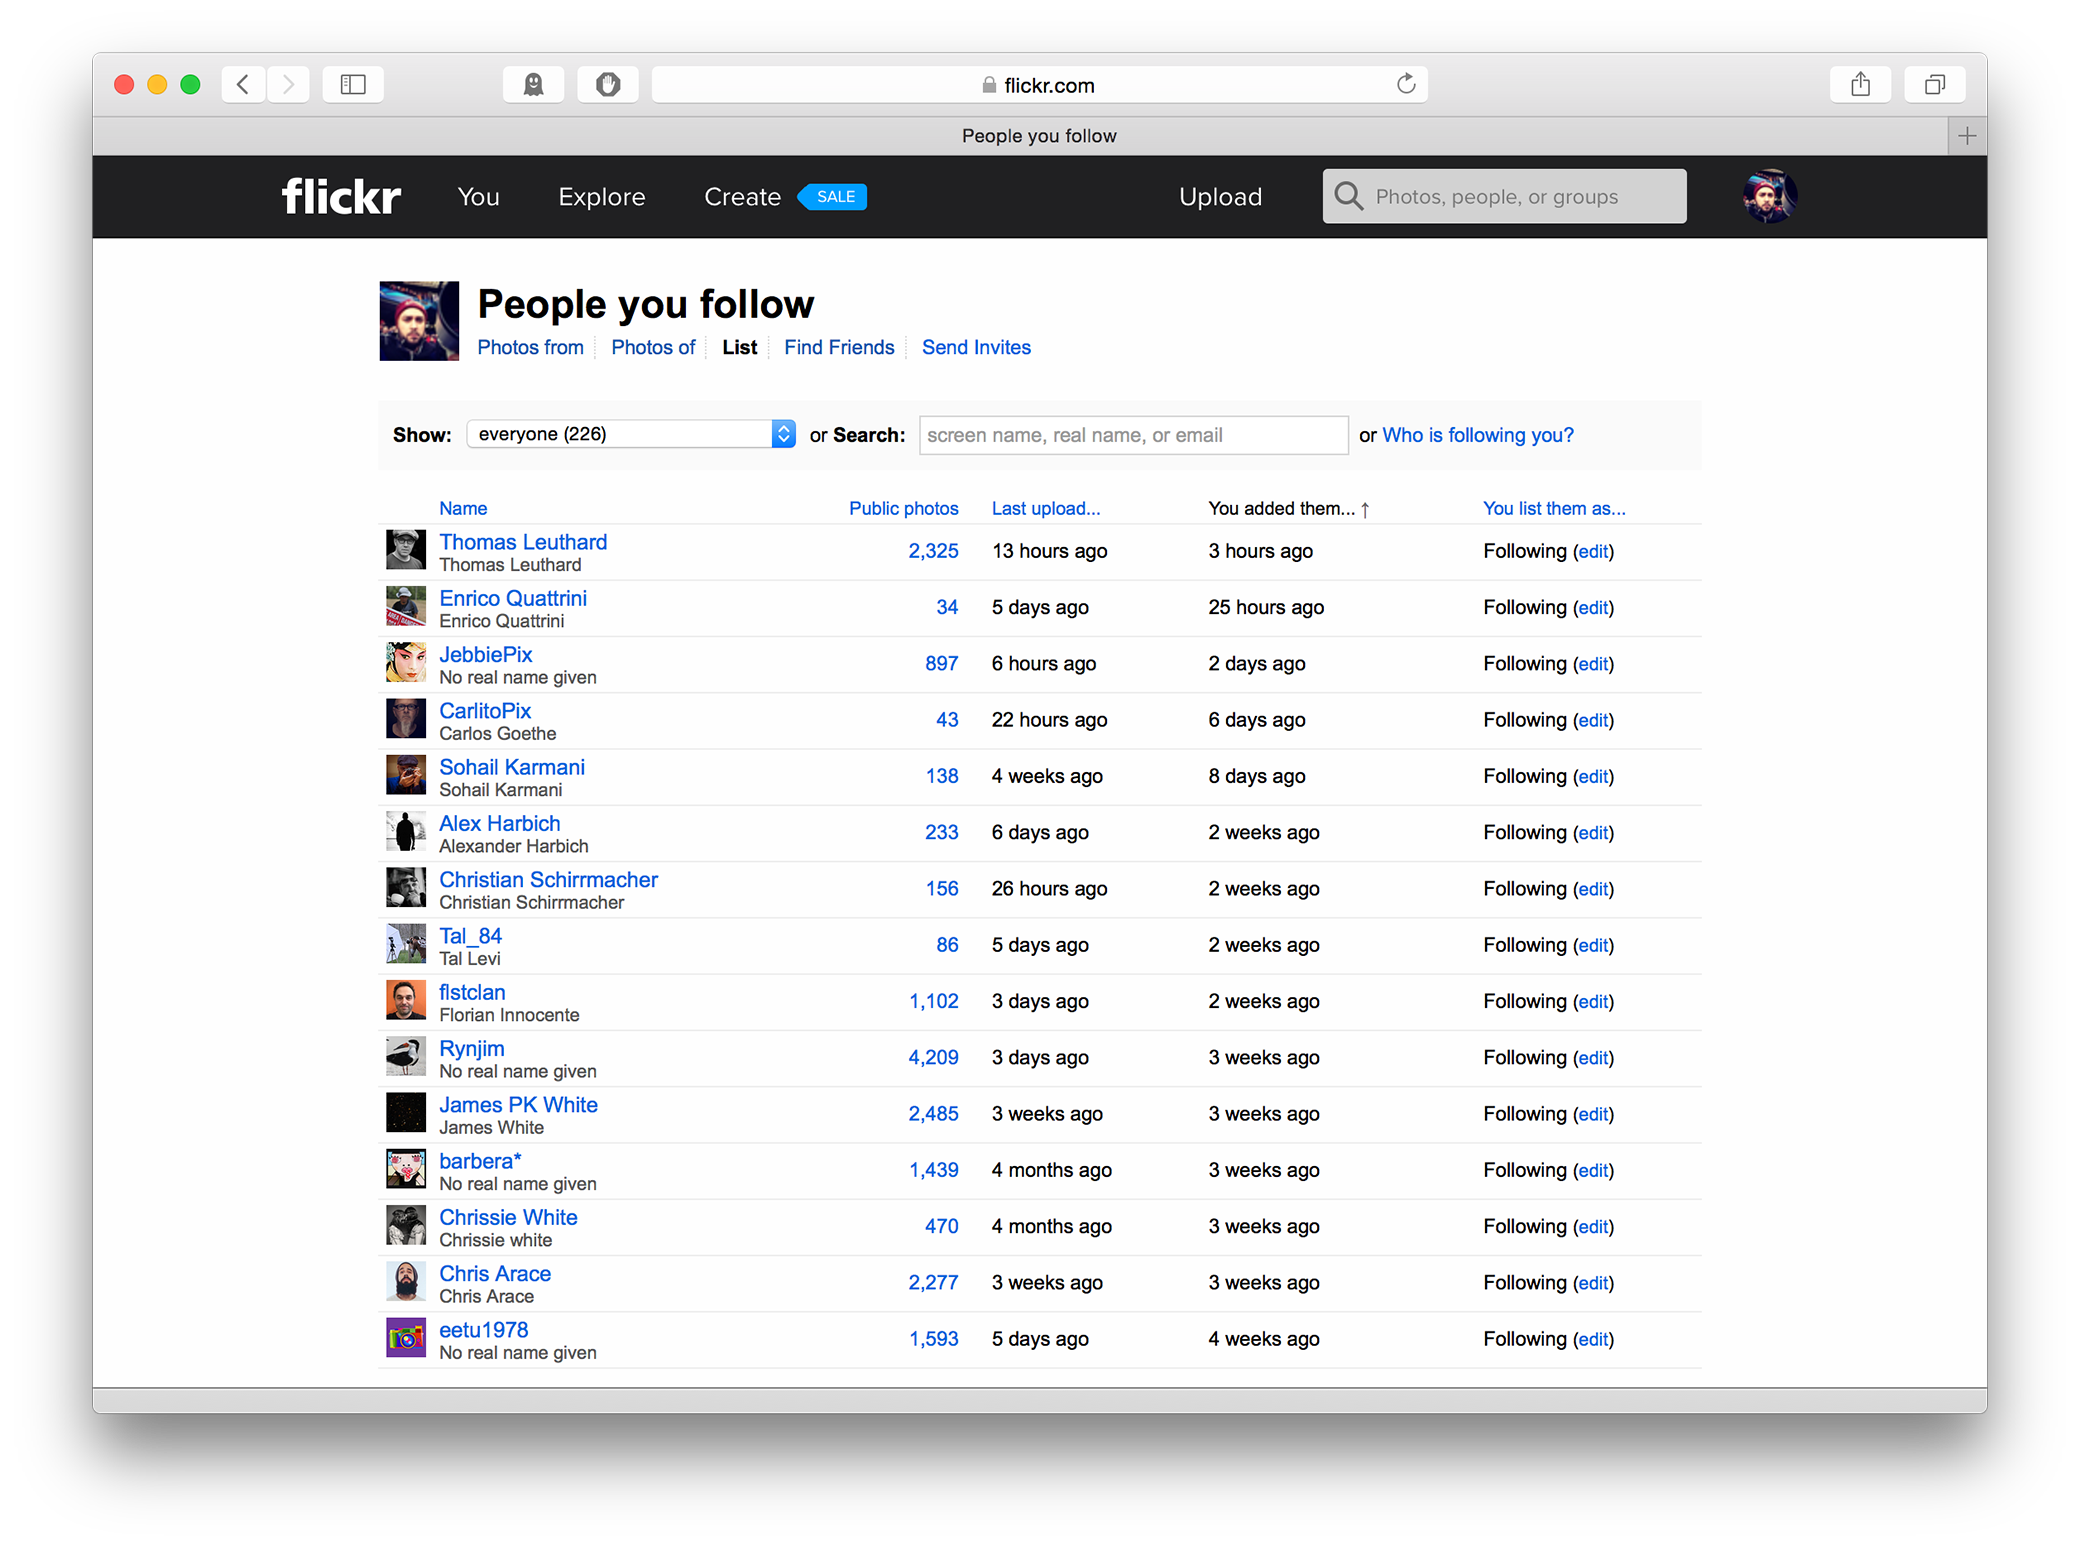 Flickr 4.0 - Neglected pages